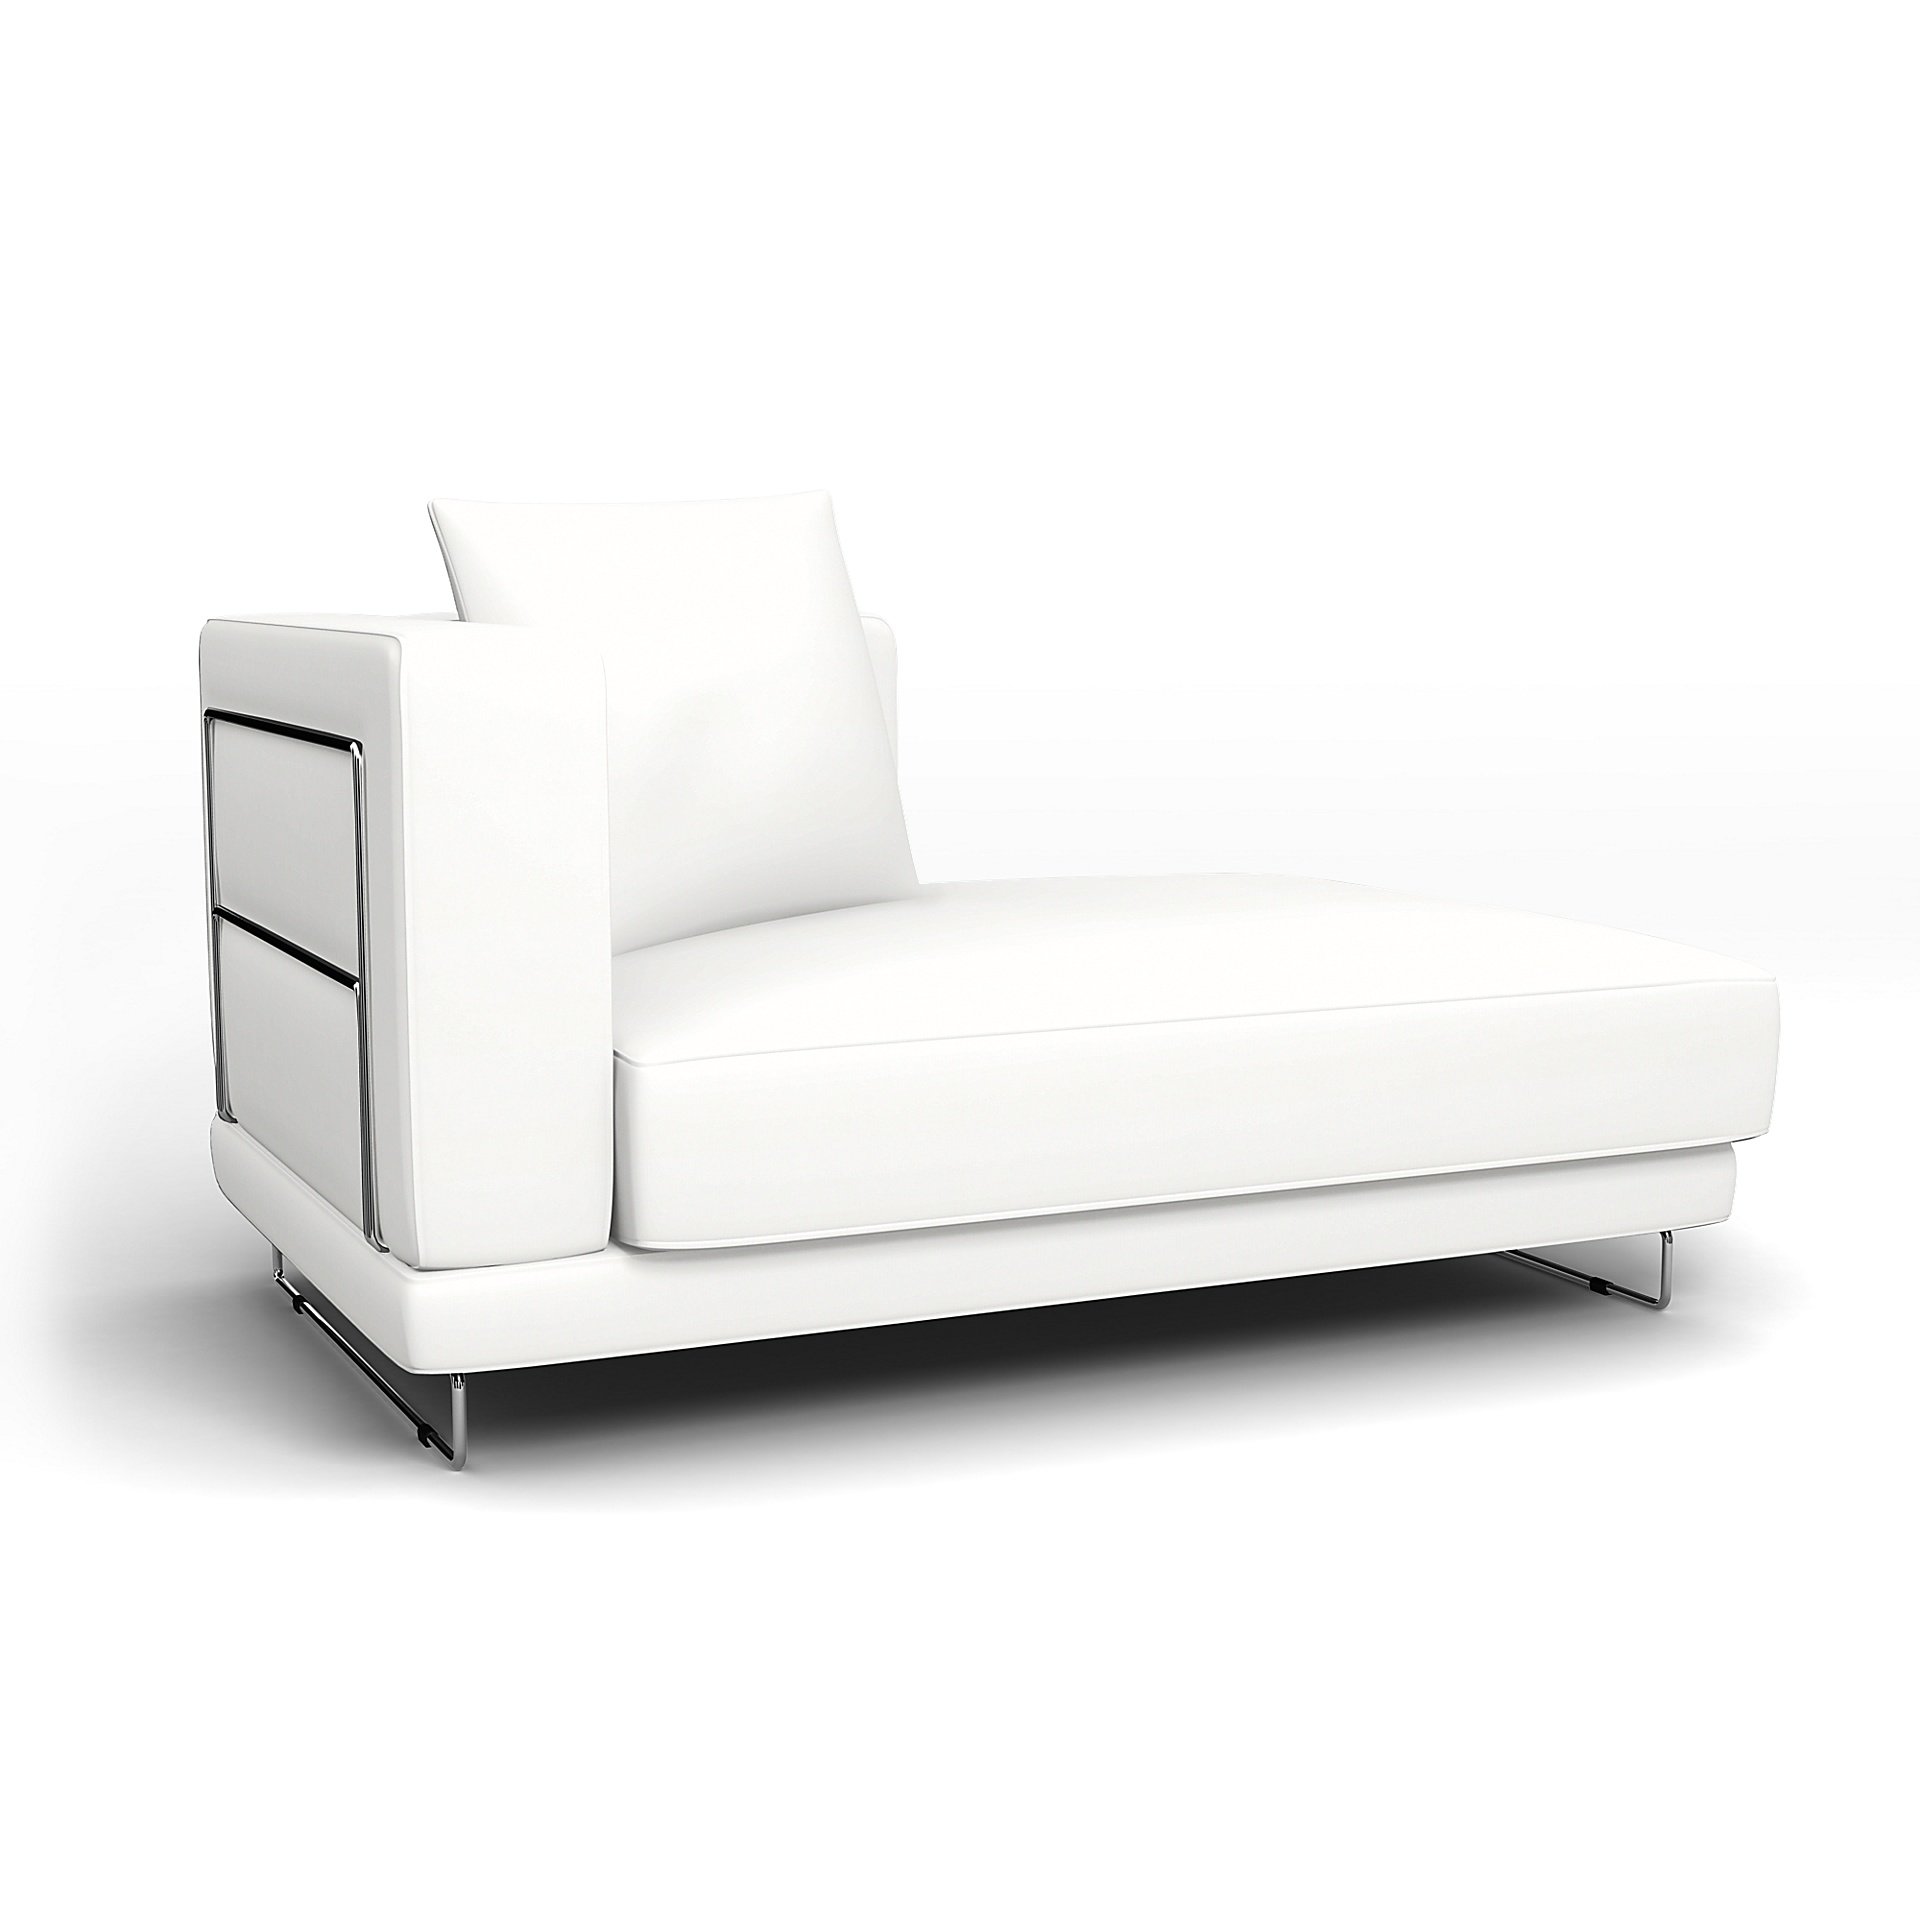 IKEA - Tylosand Chaise with Right Armrest Cover, Absolute White, Linen - Bemz